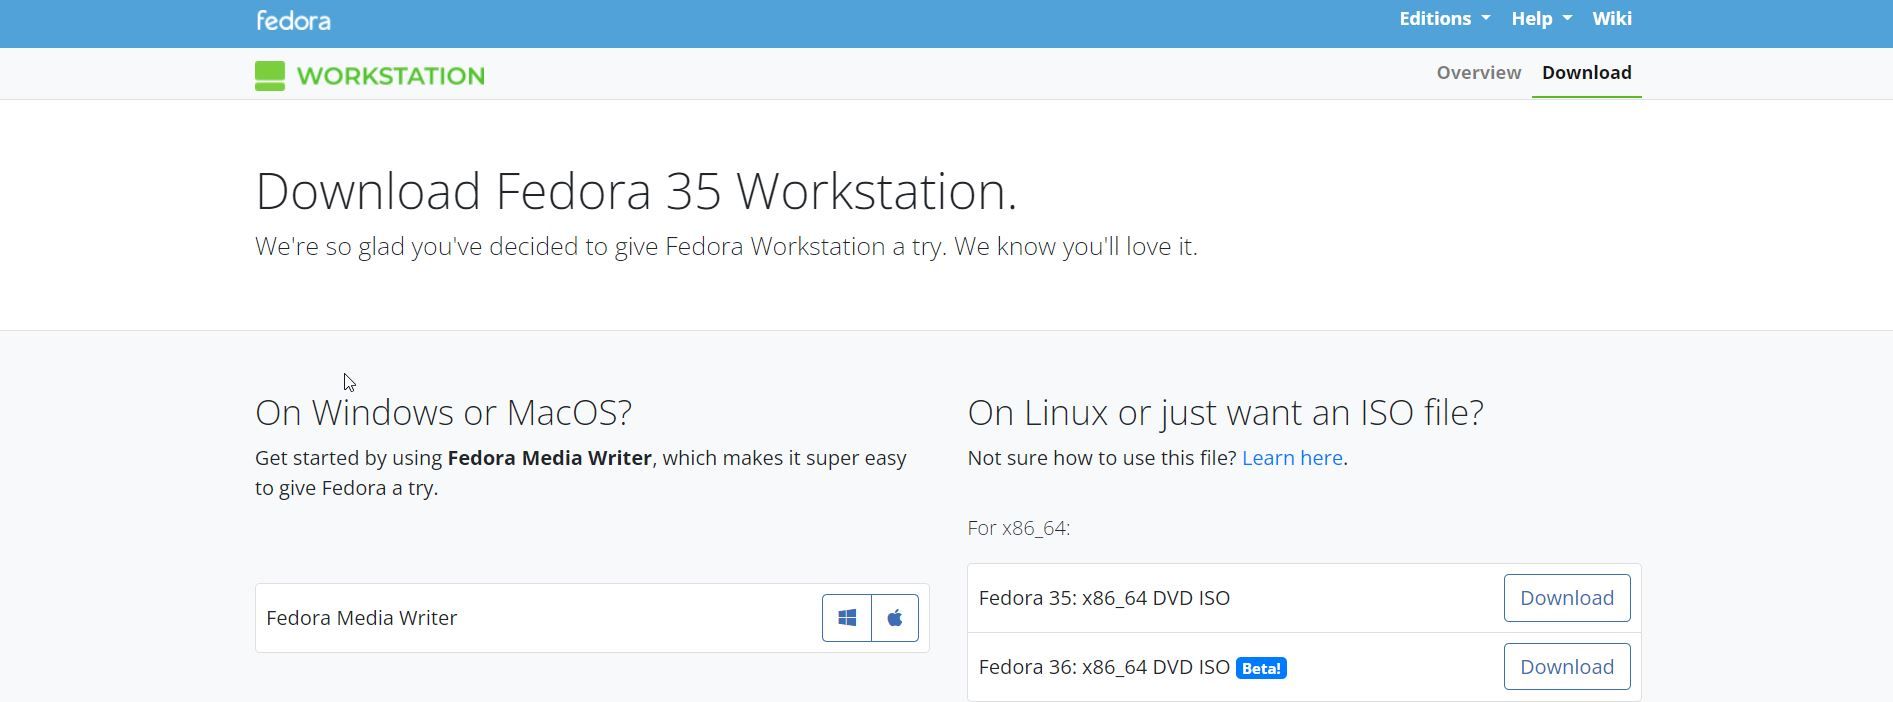 Fedora Download Page